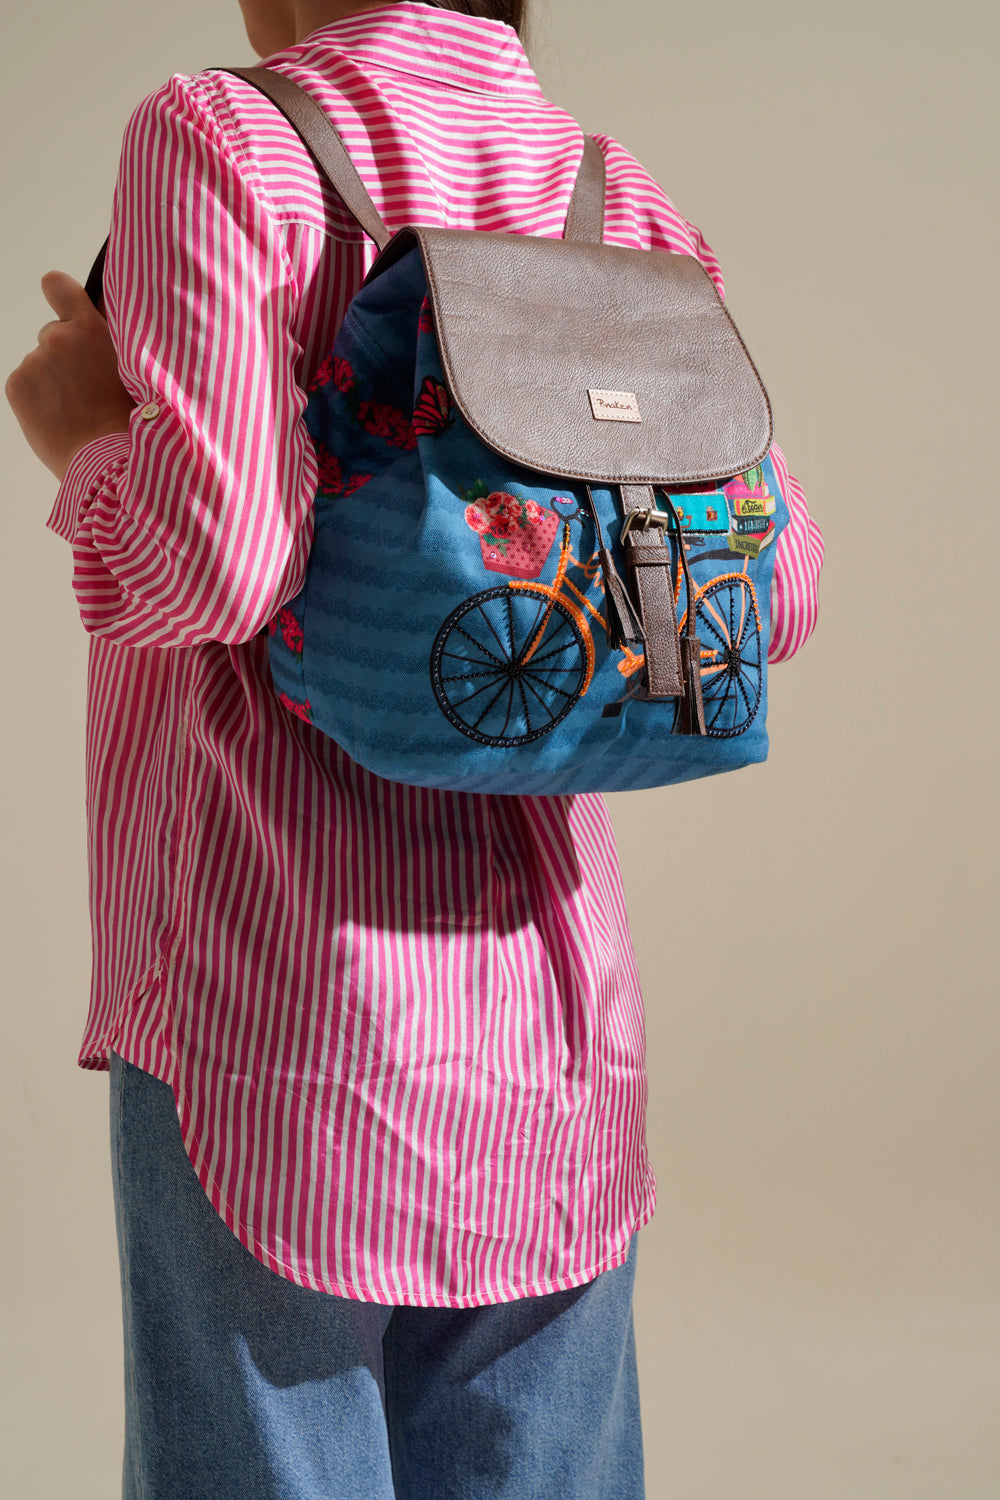 Back To School Drawstring Backpack